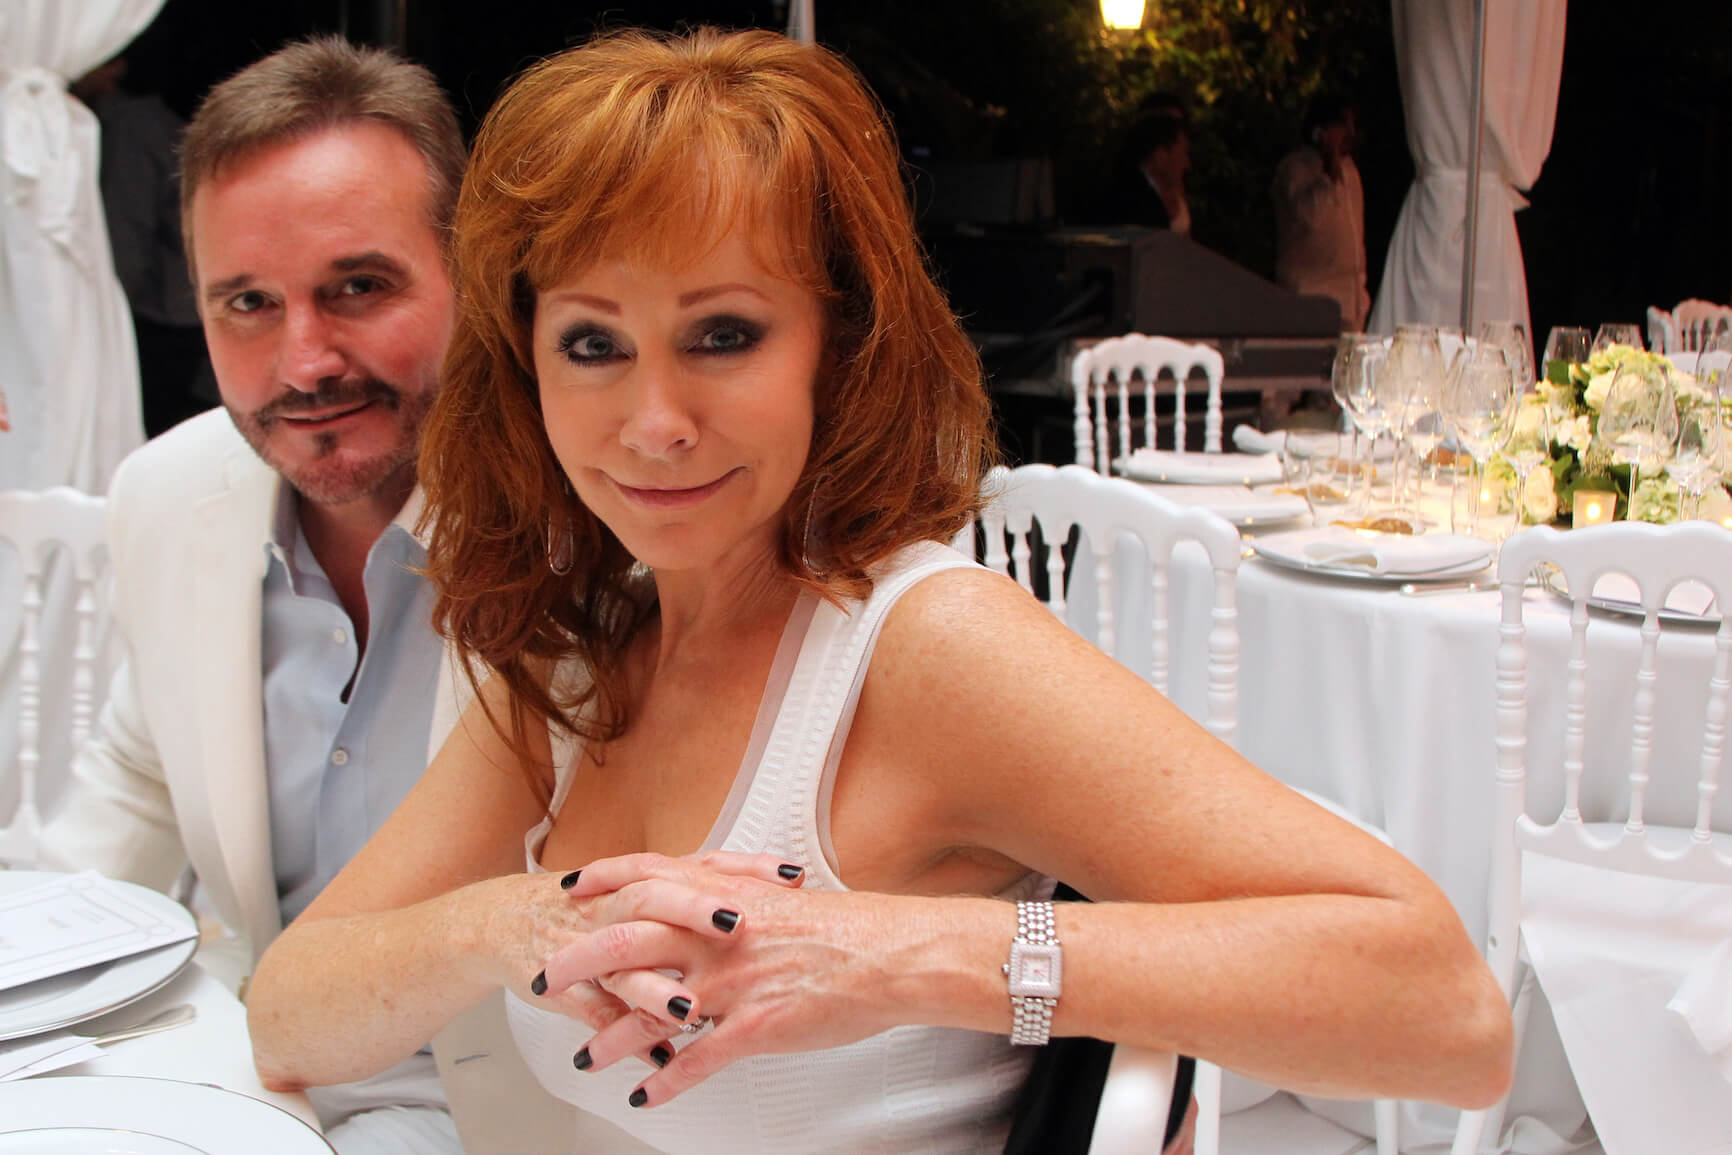 Narvel Blackstock sitting behind Reba McEntire at a white table in 2014. They are attending the White Party Dinner Hosted by Andrea and Veronica Bocelli.